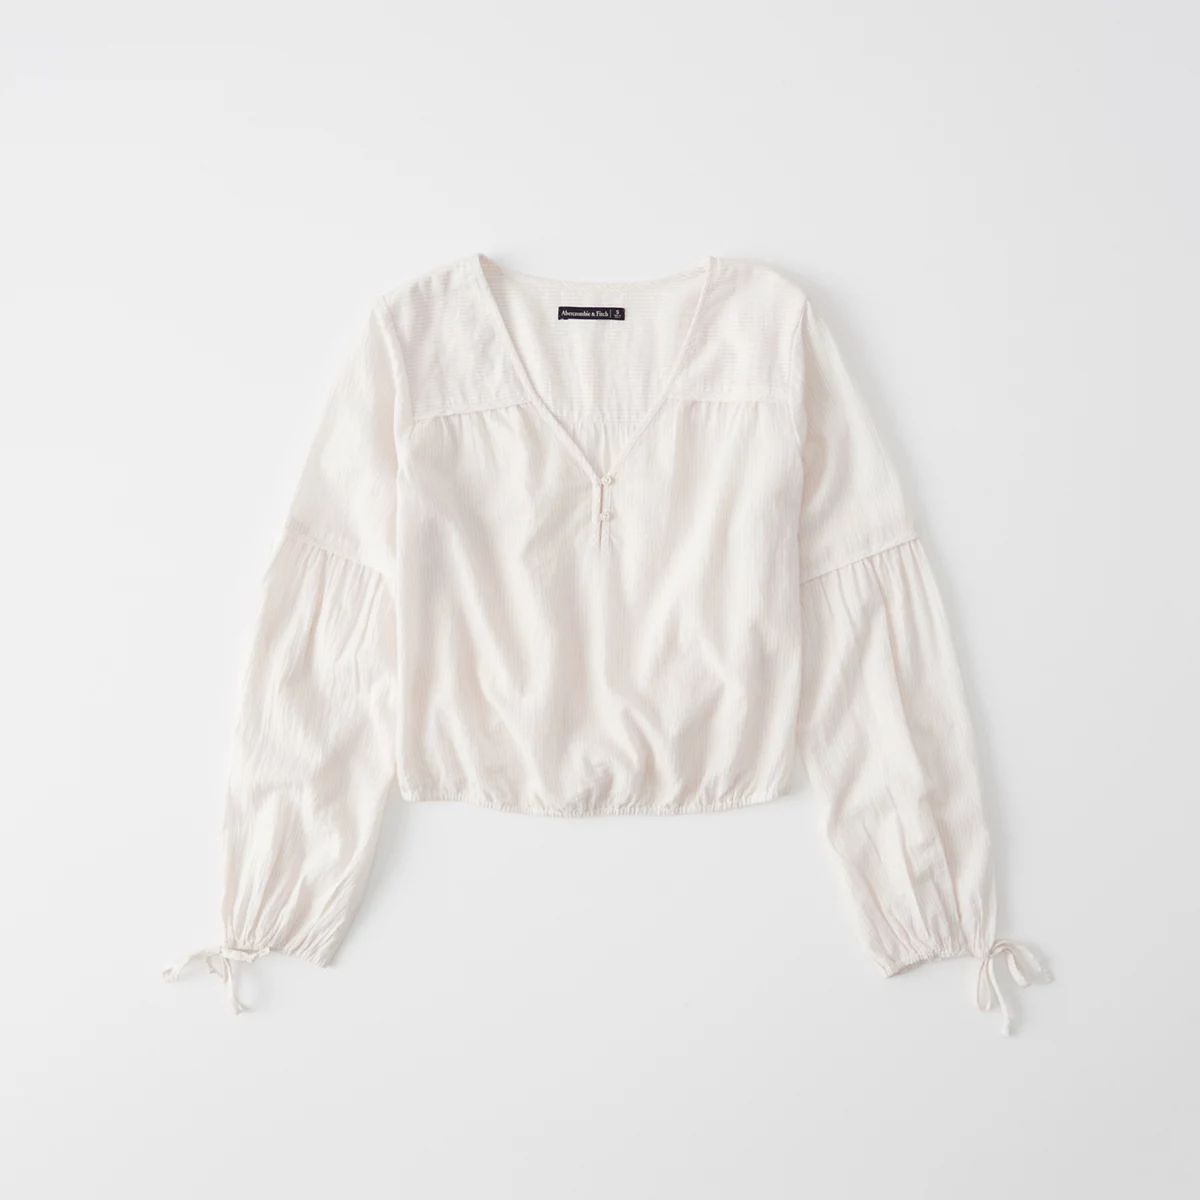 Striped Peasant Top | Abercrombie & Fitch US & UK